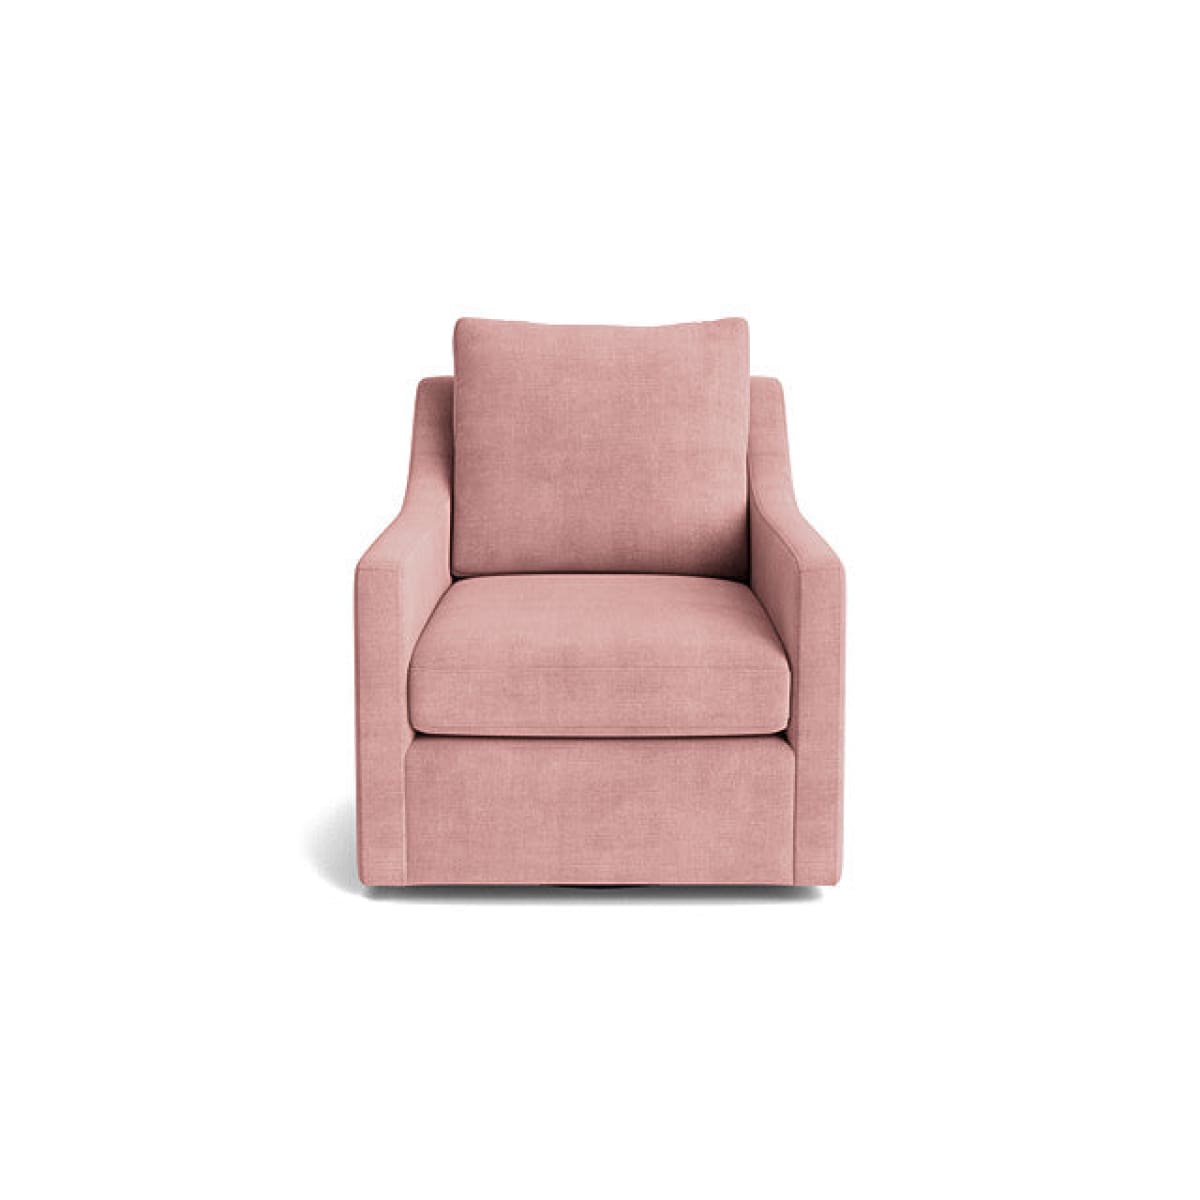 Grove Accent Chair - Analogy Blush